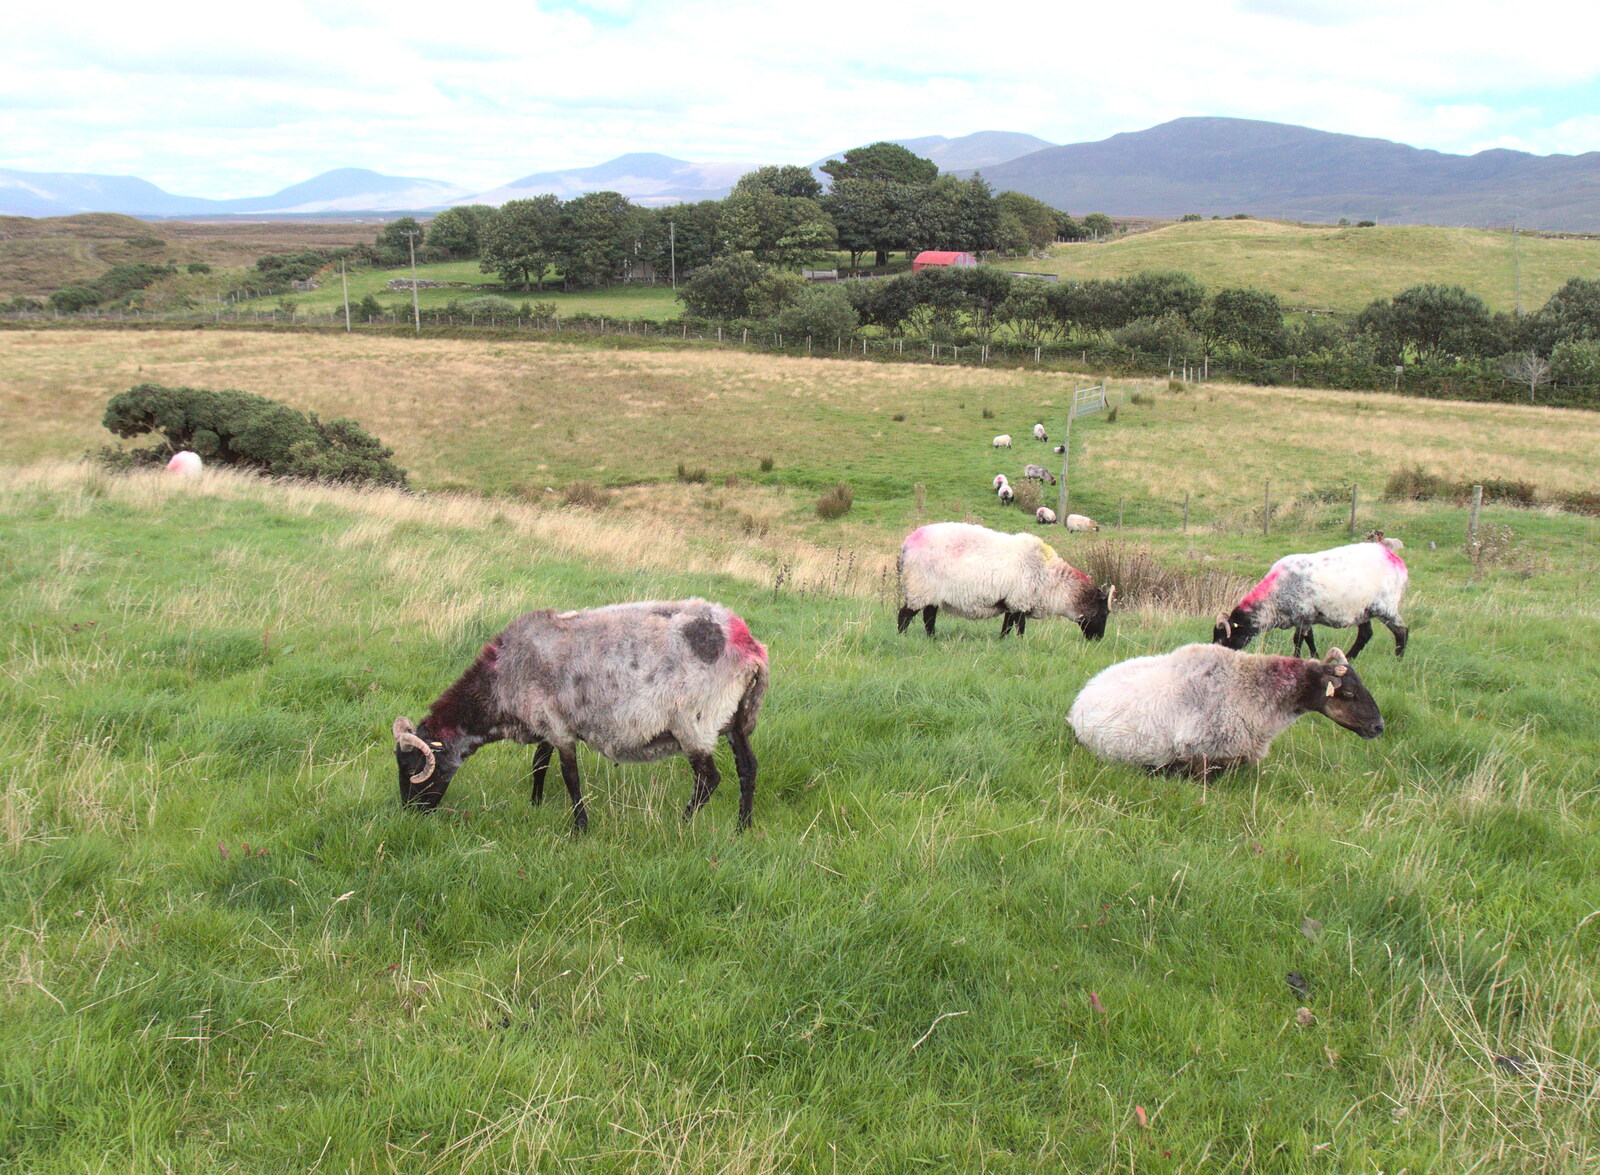 Sheep in a field from A Bike Ride to Mulranny, County Mayo, Ireland - 9th August 2017